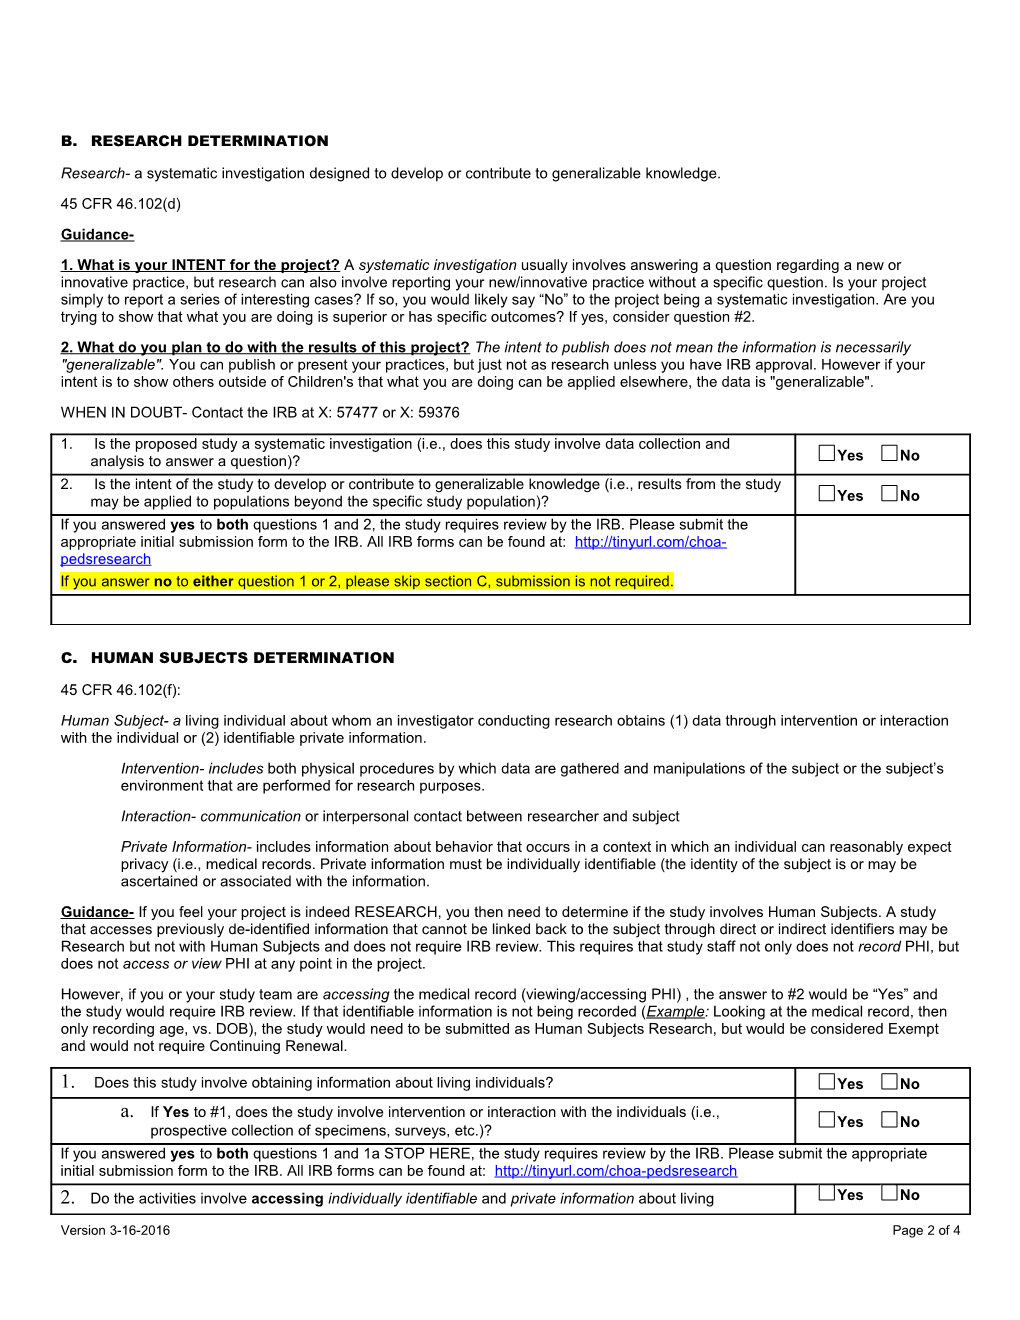 Non-Human Subjects Research Determination Form